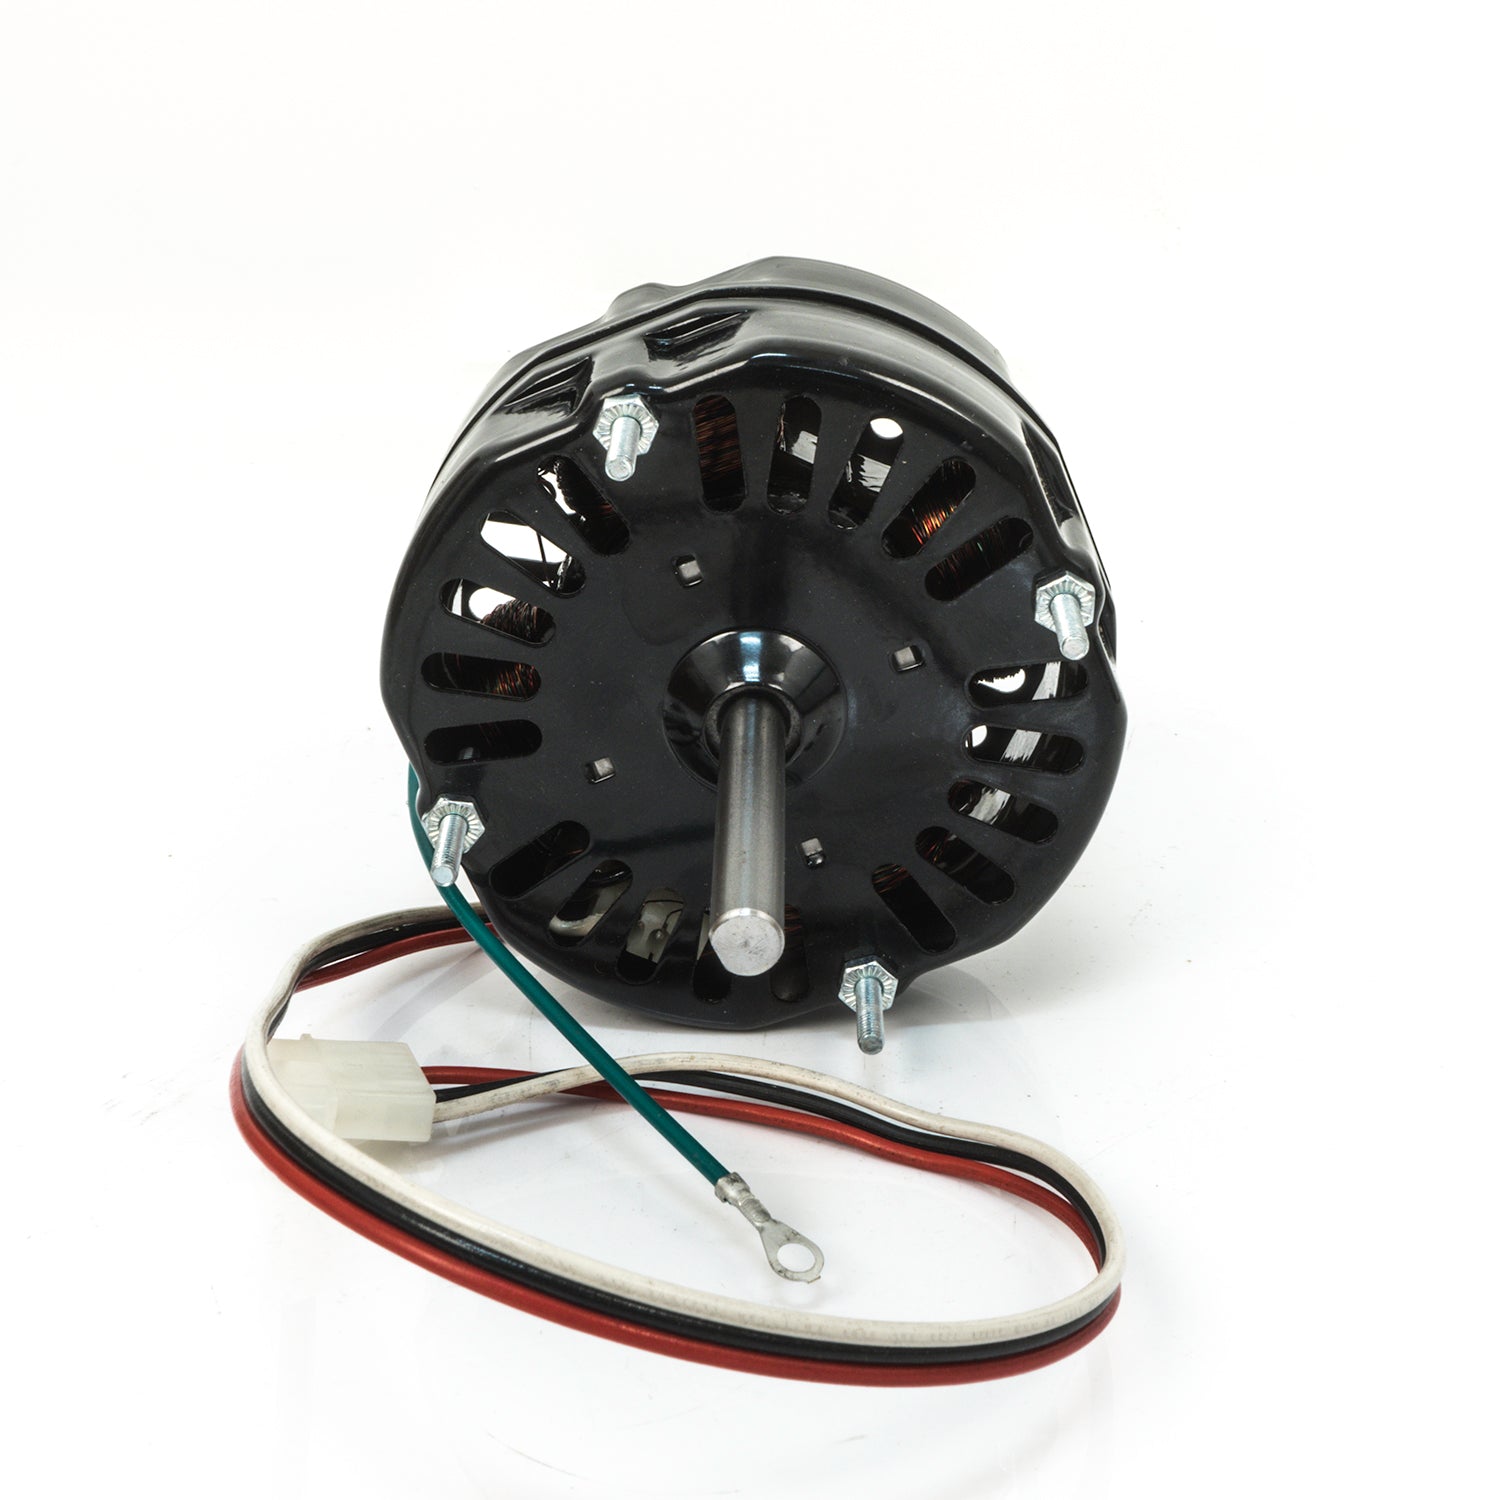 Packard 90220, HVAC/R Motors, OEM Replacement, Shaded Pole.